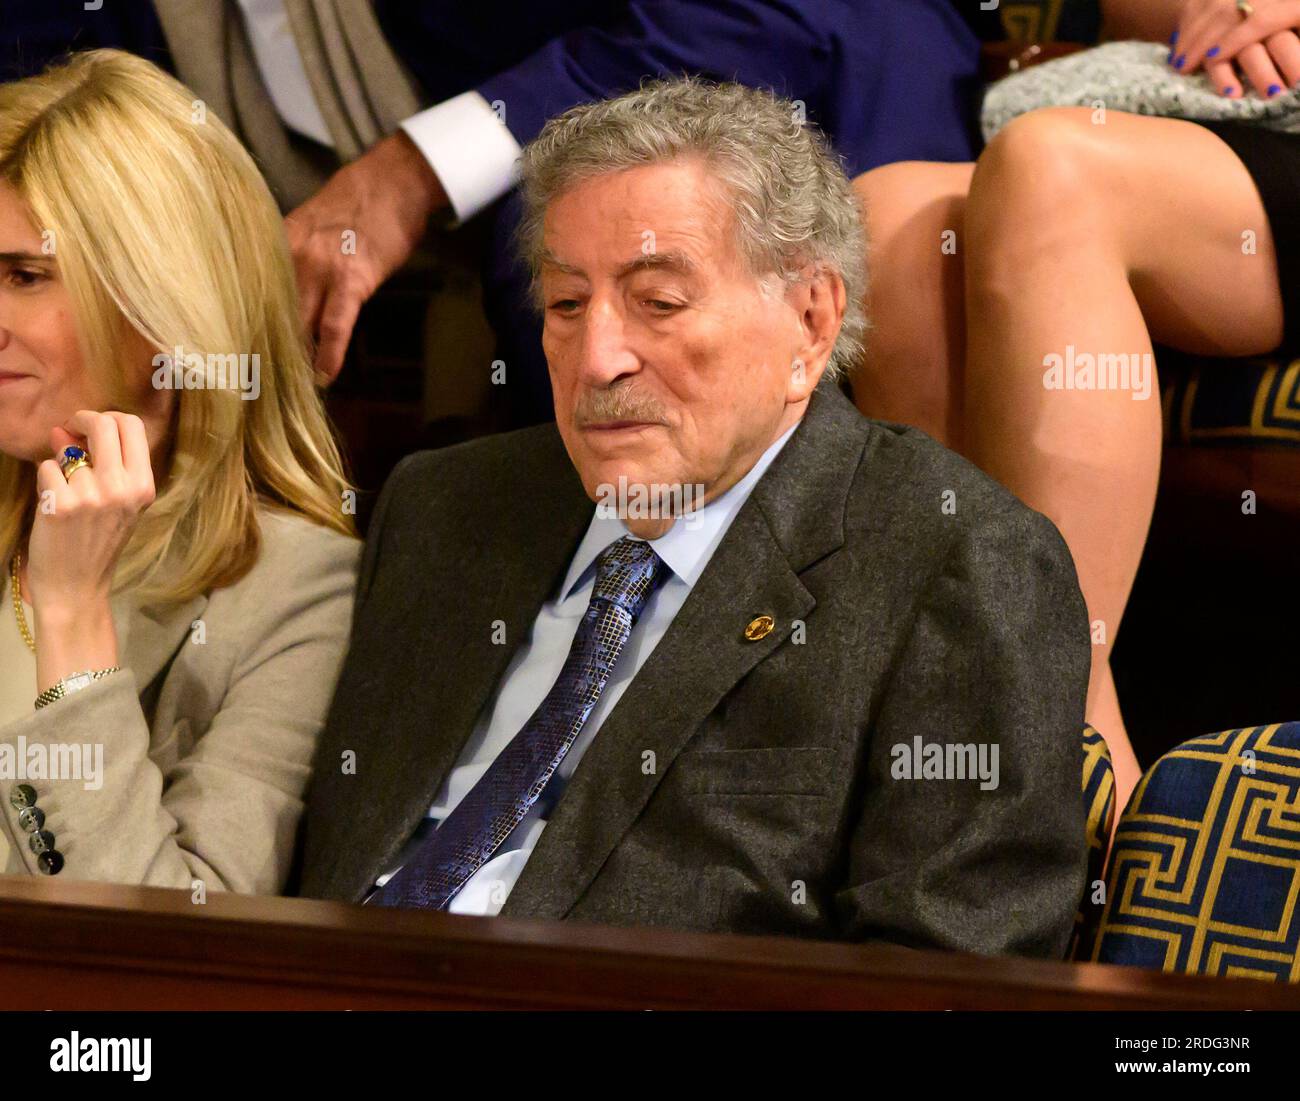 Singer Tony Bennett, a guest of Speaker of the United States House of Representatives Nancy Pelosi (Democrat of California), sits in the gallery as the 116th Congress convenes for its opening session in the US House Chamber of the US Capitol in Washington, DC on Thursday, January 3, 2019. Photo by Ron Sachs / CNP/ABACAPRESS.COM (RESTRICTION: NO New York or New Jersey Newspapers or newspapers within a 75 mile radius of New York City) Stock Photo